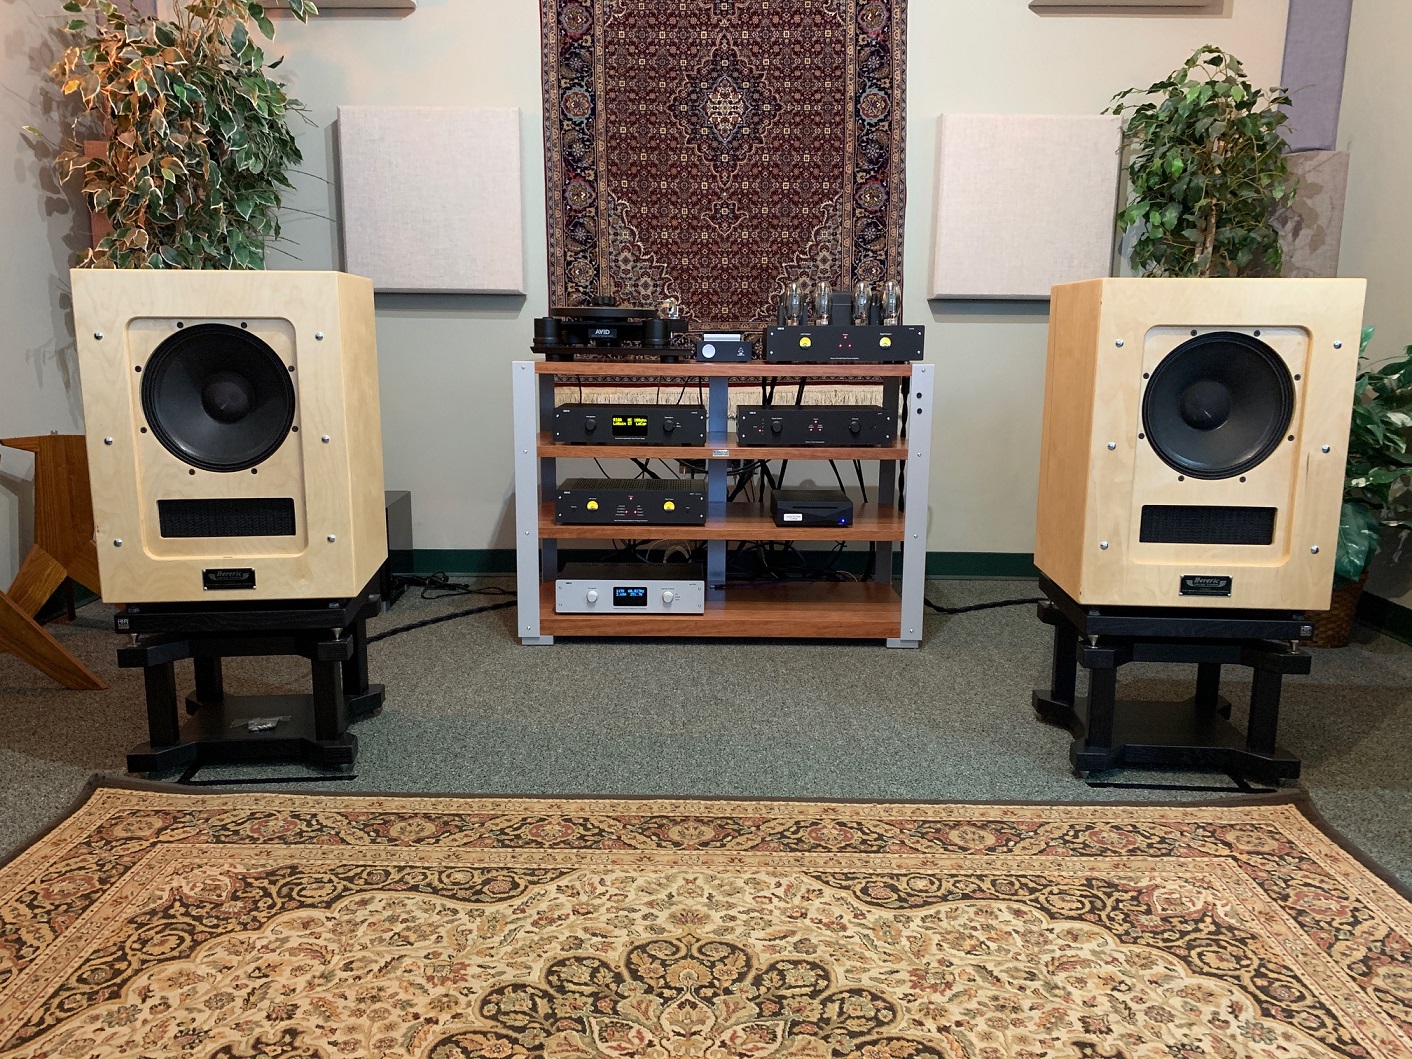 Heretic AD614 speakers are now on display at Fidelis